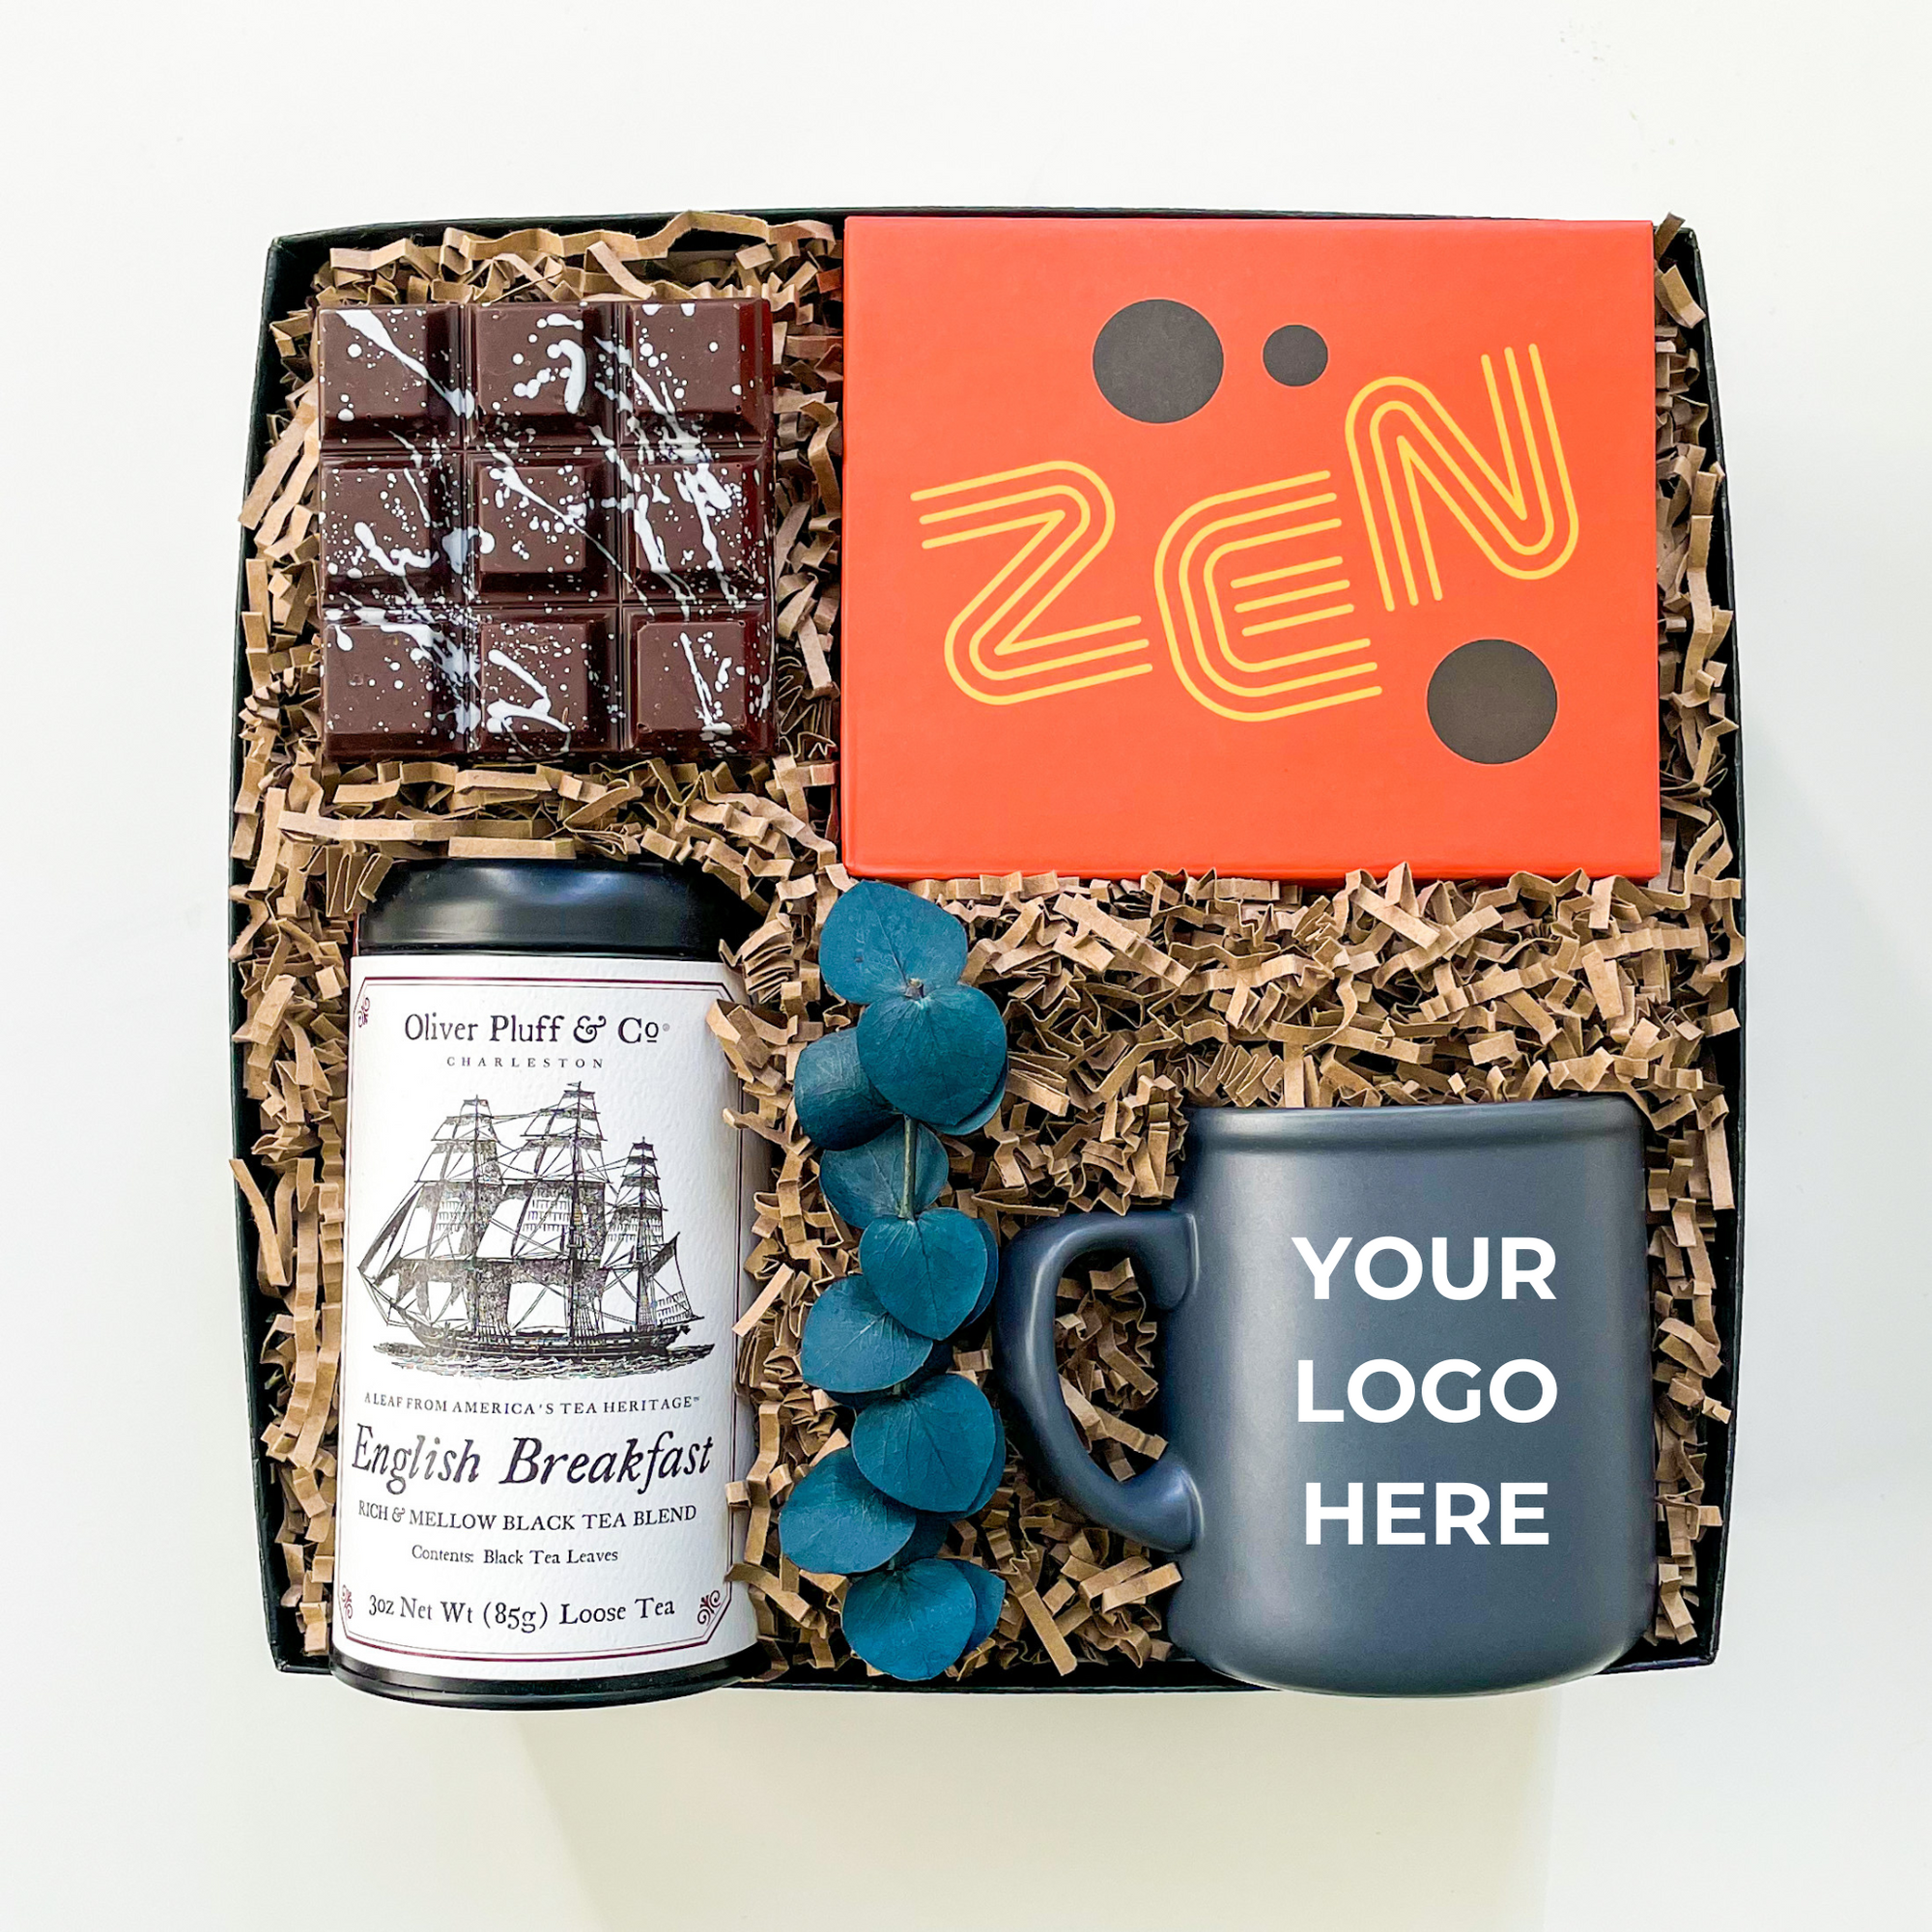 What Makes A Good Corporate Gift? • Teak and Twine